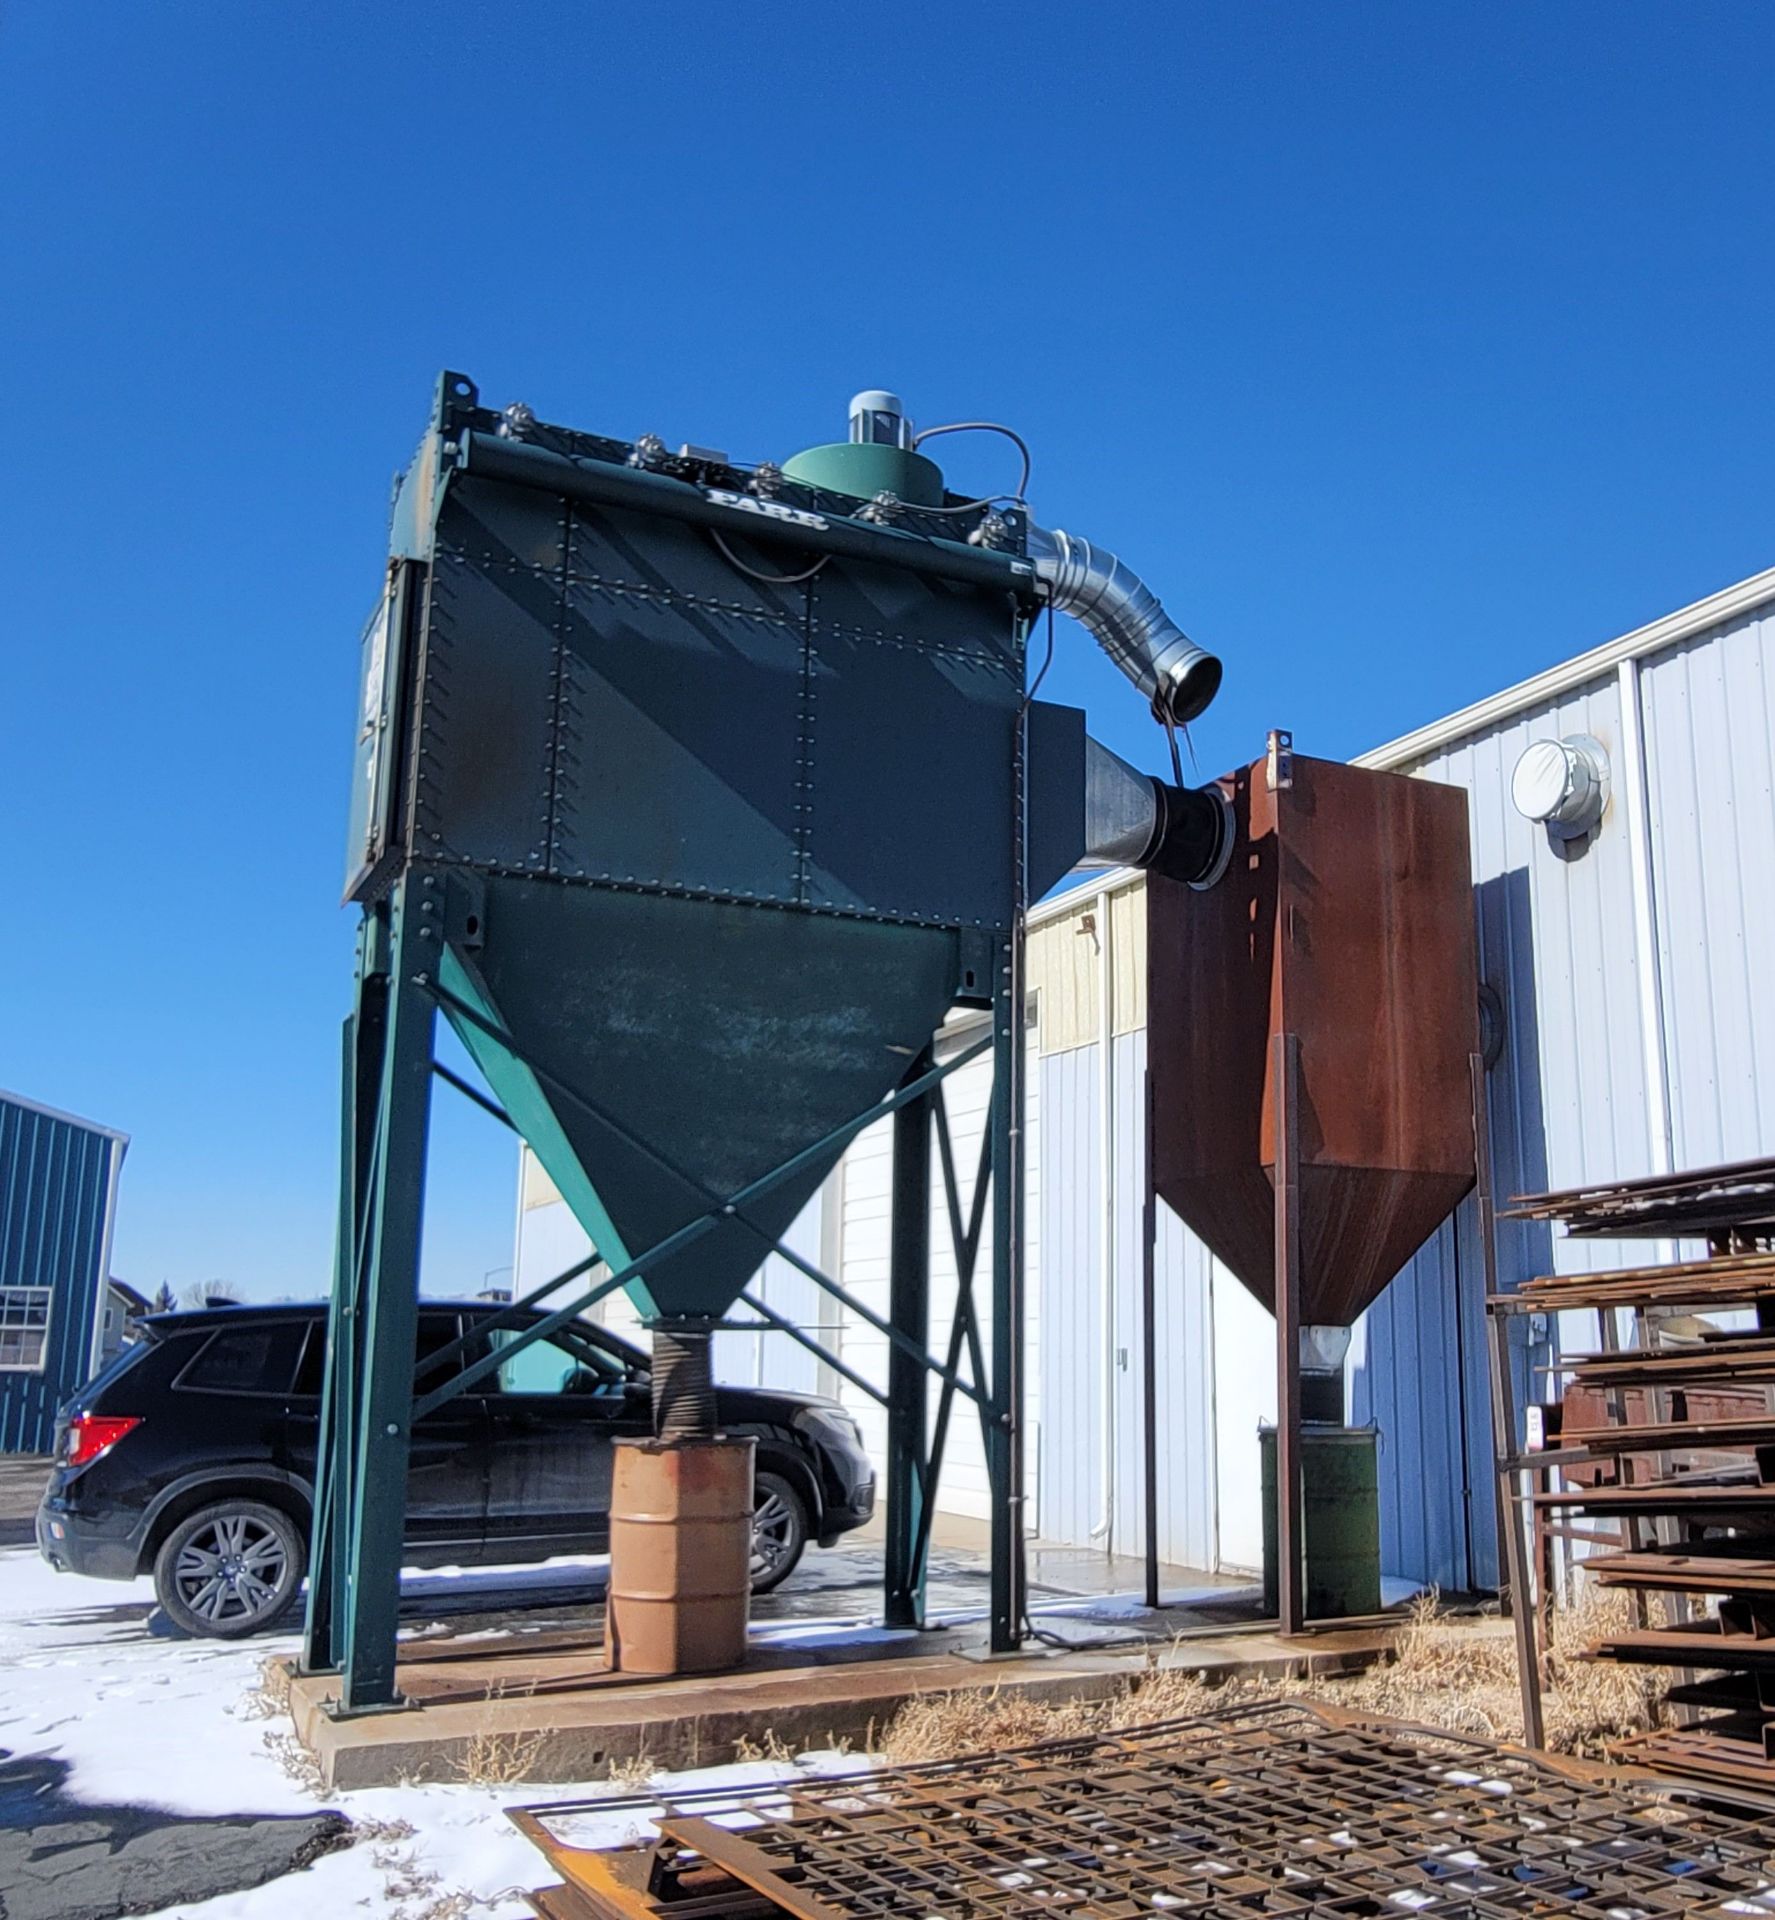 FARR GOLD SERIES INDUSTRIAL DUST COLLECTOR, W/ PRE COLLECTOR UNIT, DIMENSIONS OF LARGE COLLECTOR: 4' - Image 5 of 6